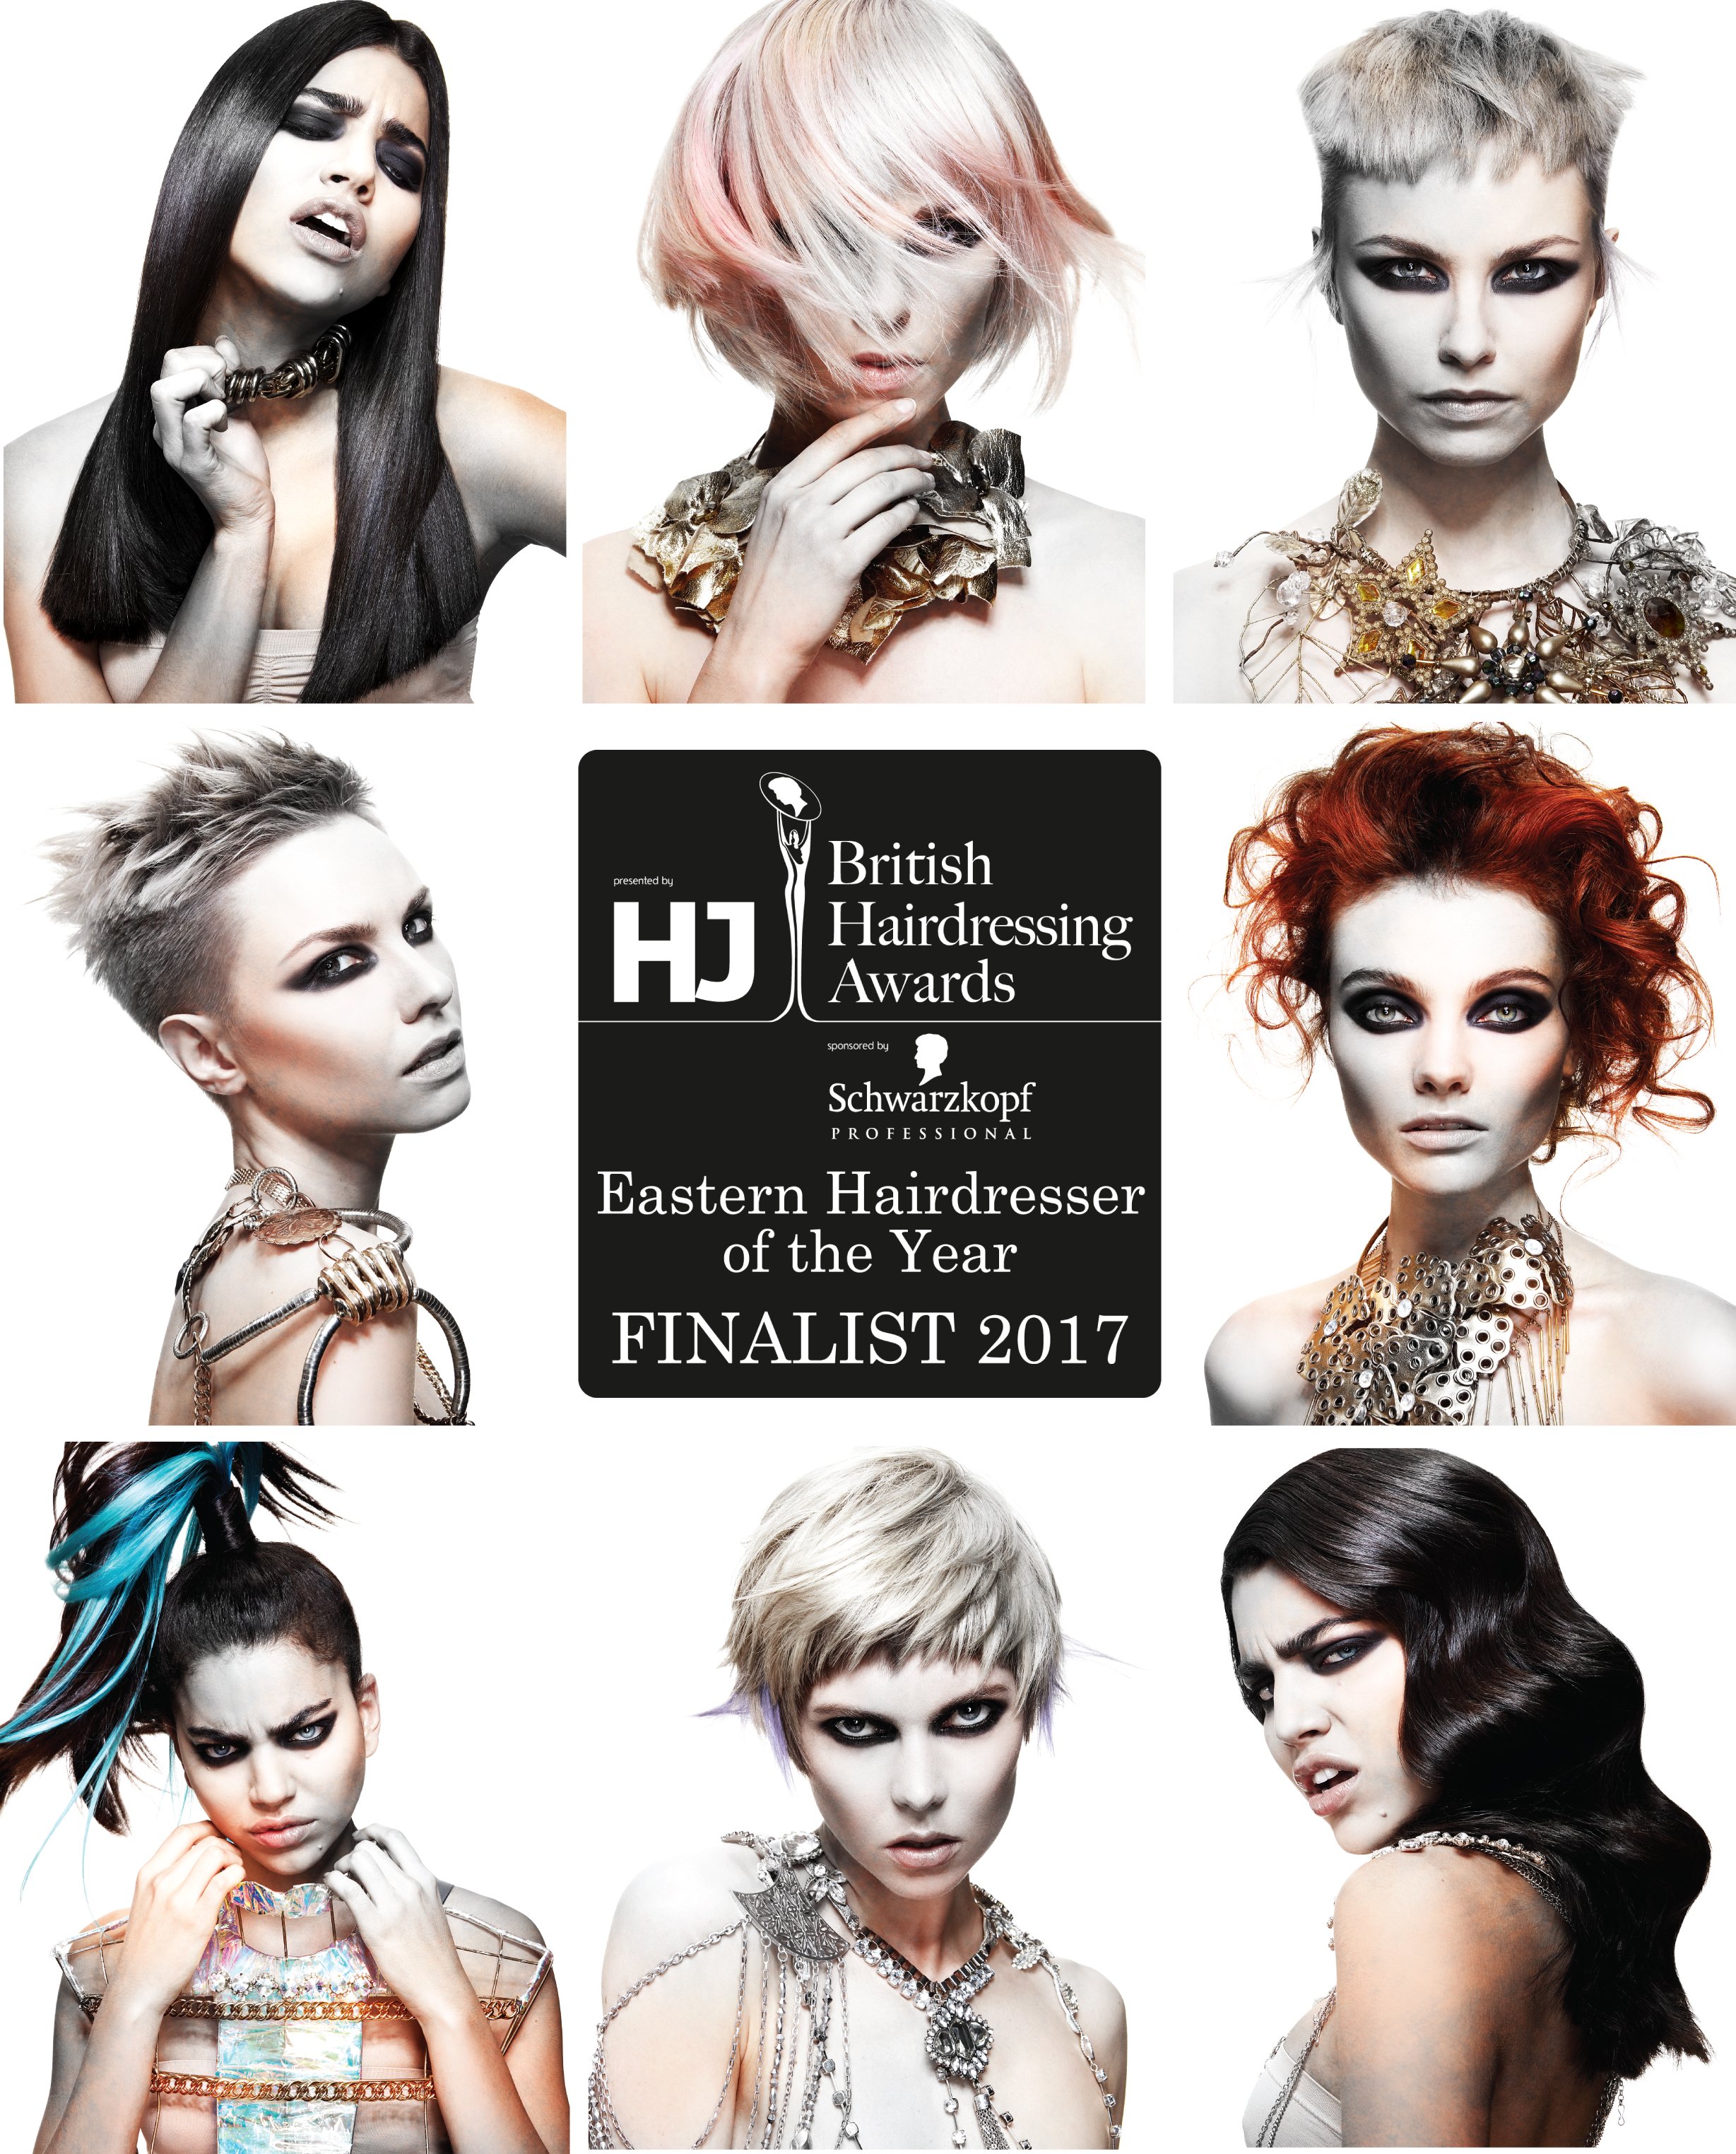 A Phenomenal Year For Christian Wiles Hairdressing!